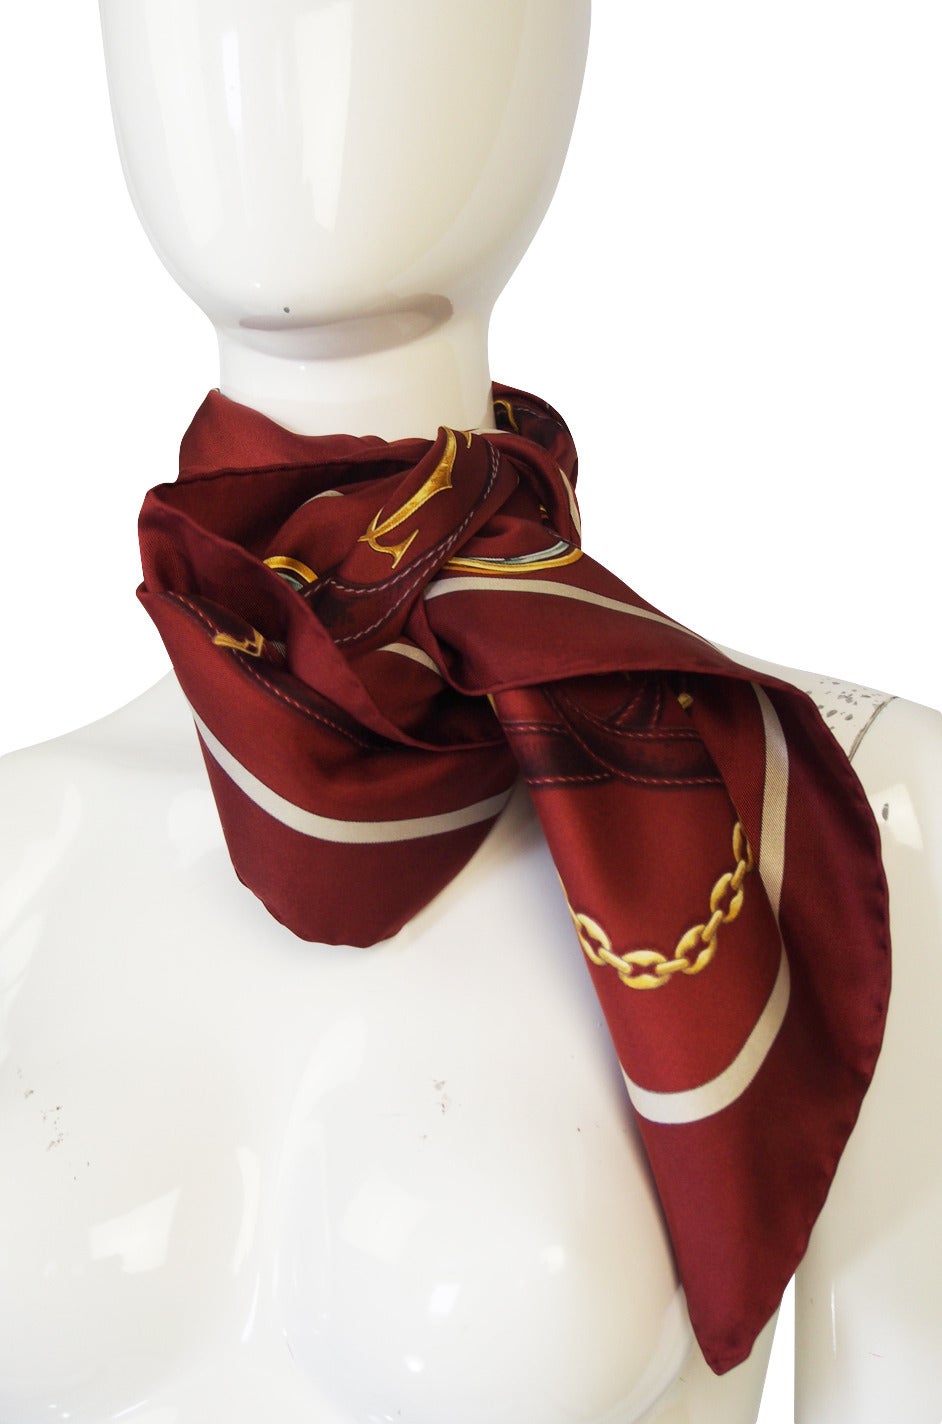 Beautiful silk twill Cartier scarf done with a classic 